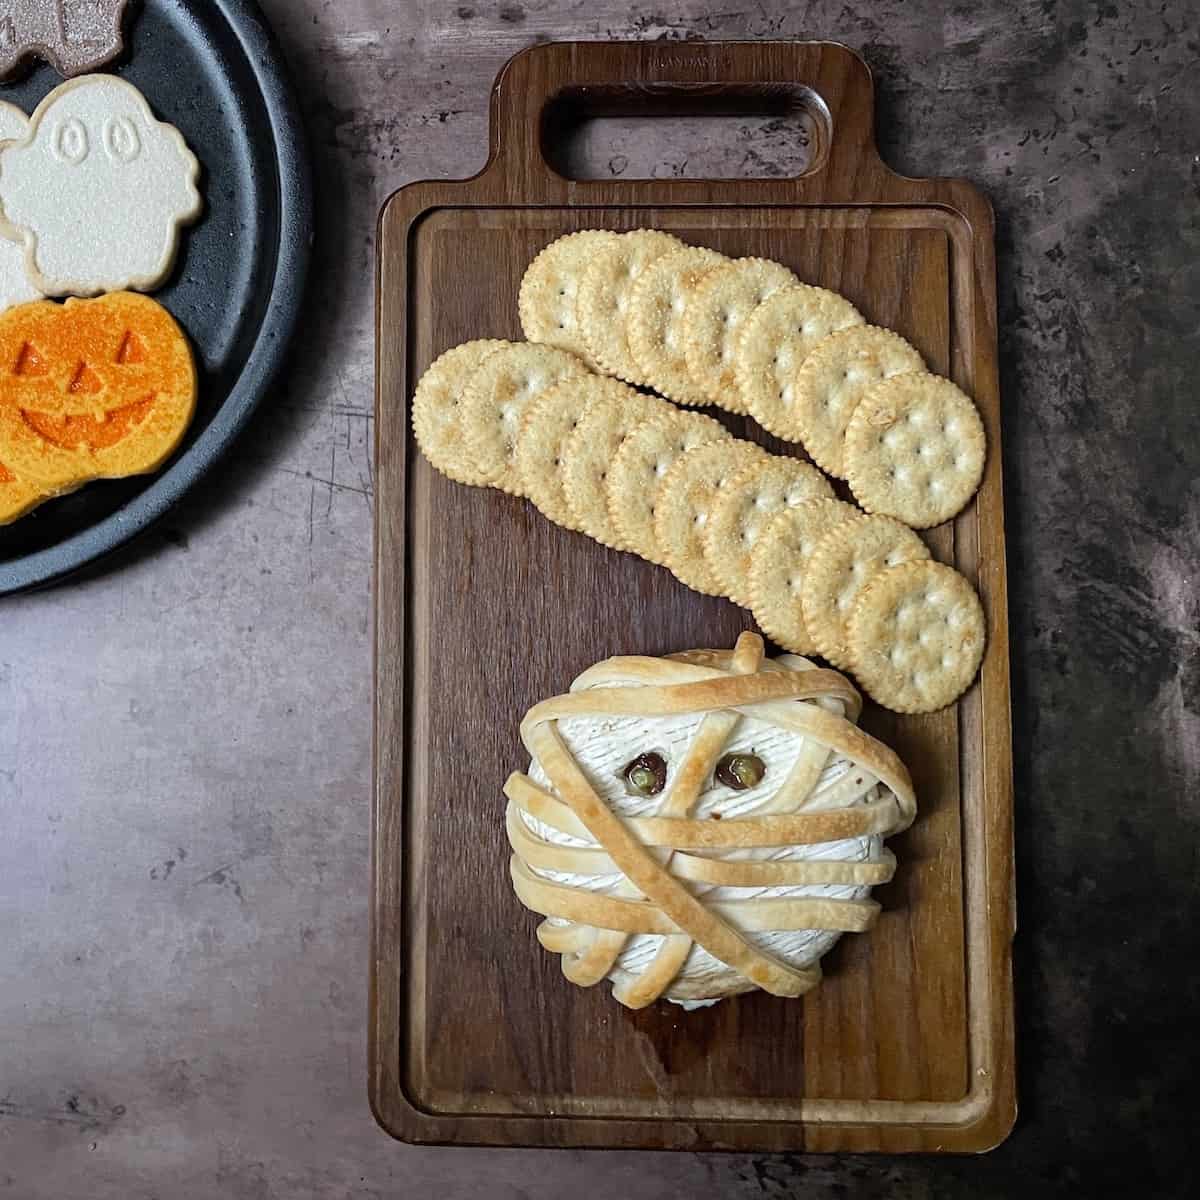 Mummy Baked Brie for Halloween